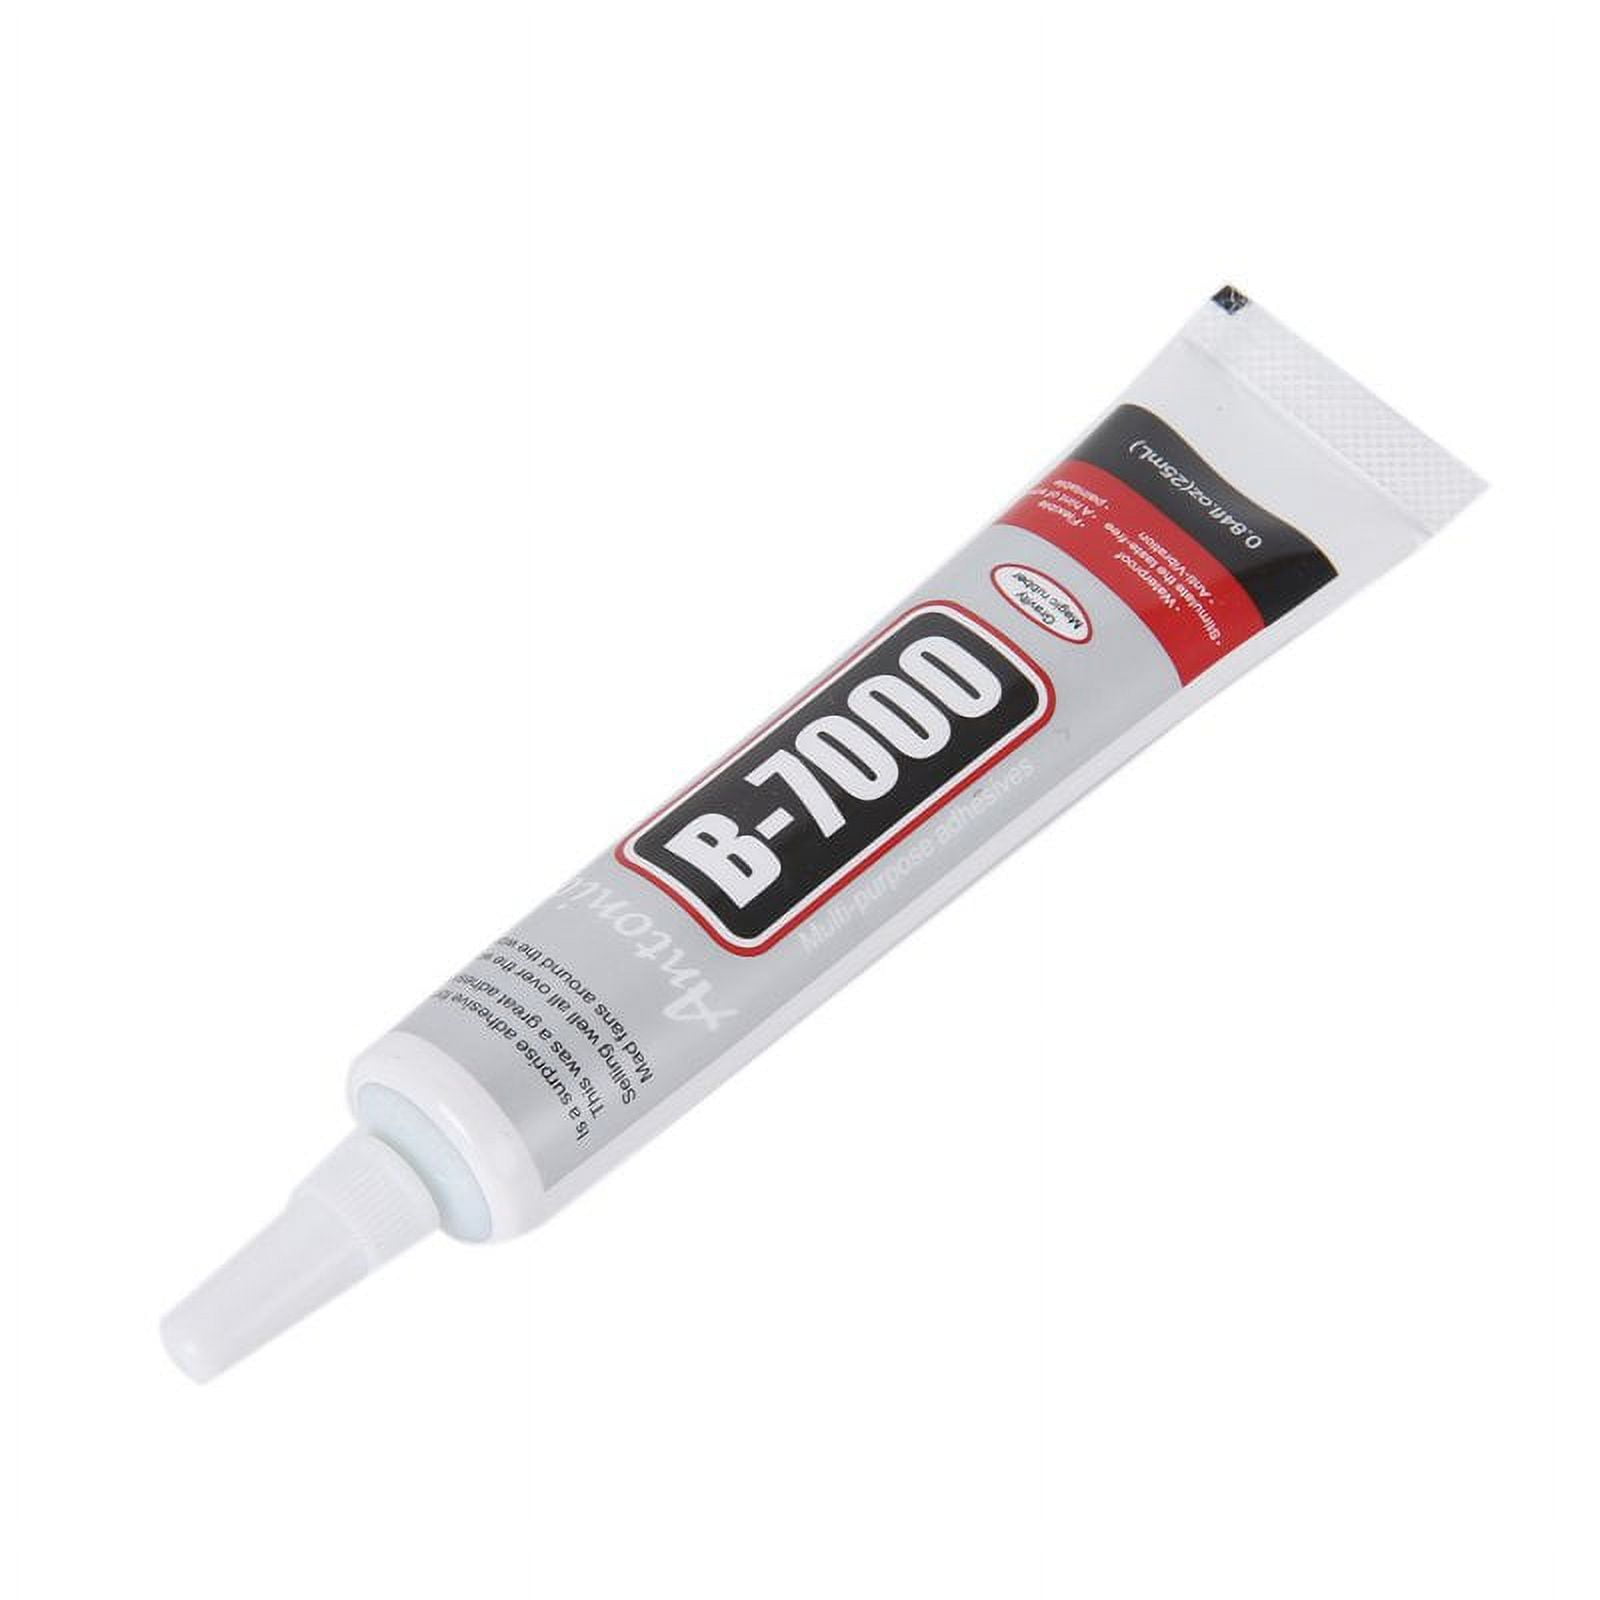 B6000 Adhesive Glue, 3.7 FL OZ With Attached Nozzle Tip (110 mL) – Hai Trim  & Feathers